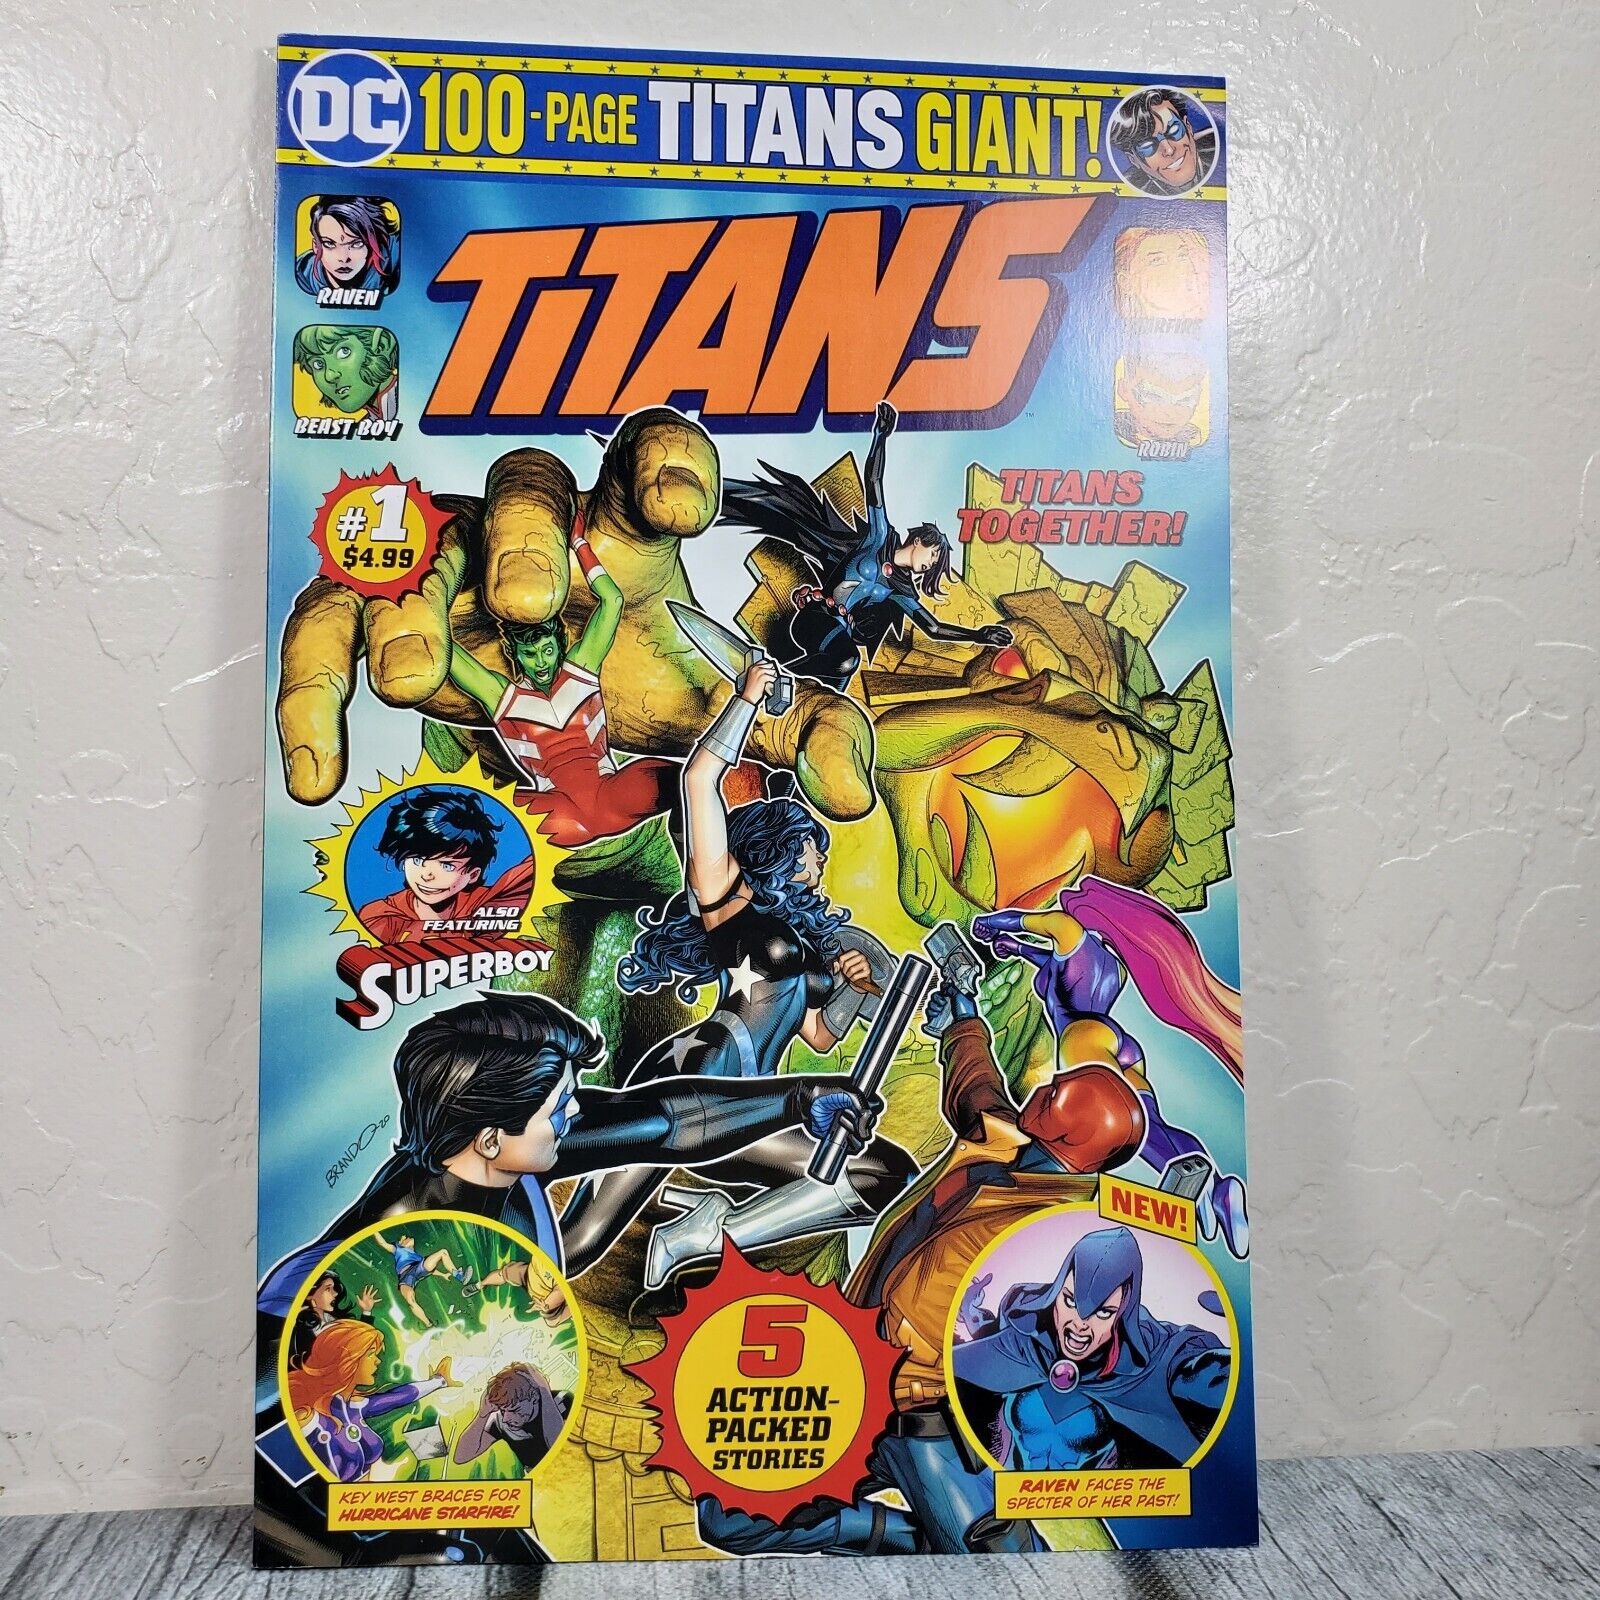 DC Comics 100 Page Giant Titans #1 2020 Modern Comic Book Nightwing Superboy